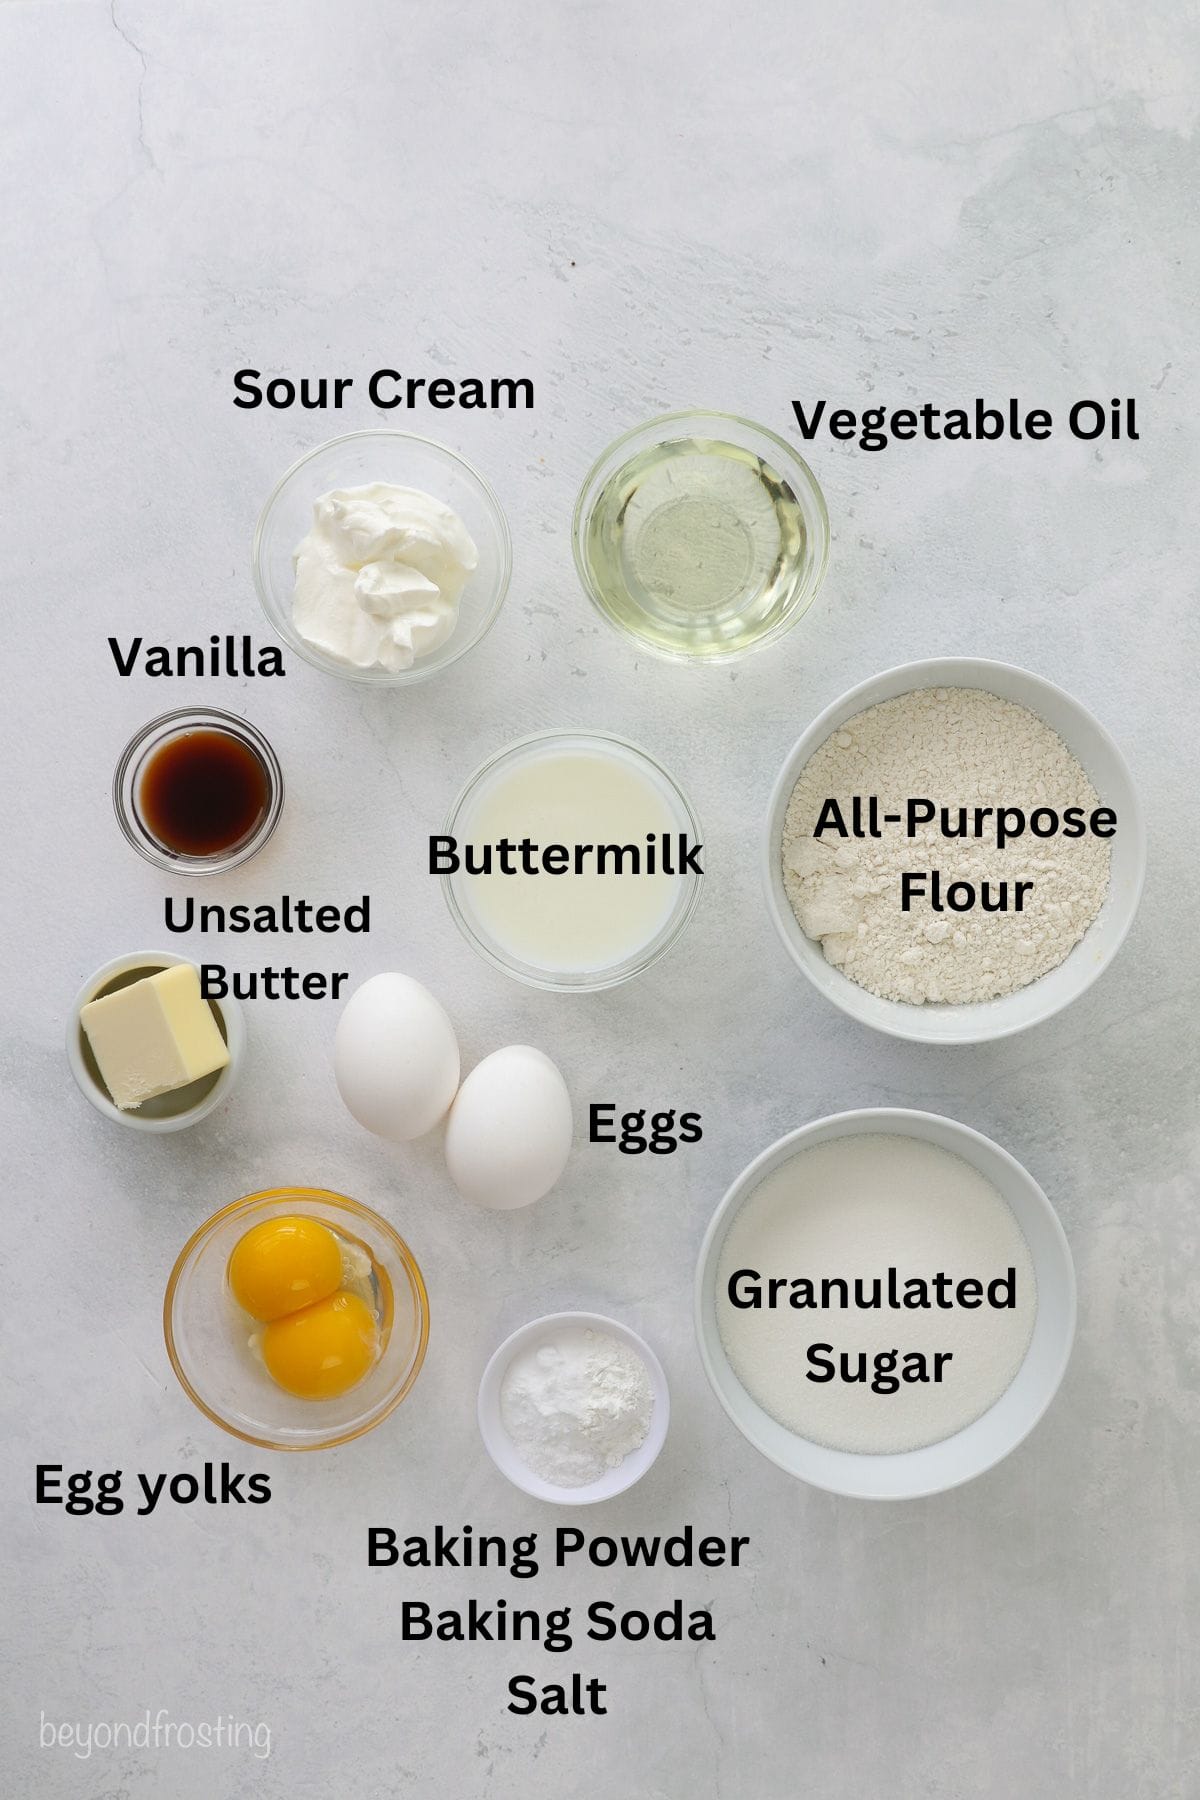 Ingredients for homemade yellow cupcakes with text labels overlaying each ingredient.